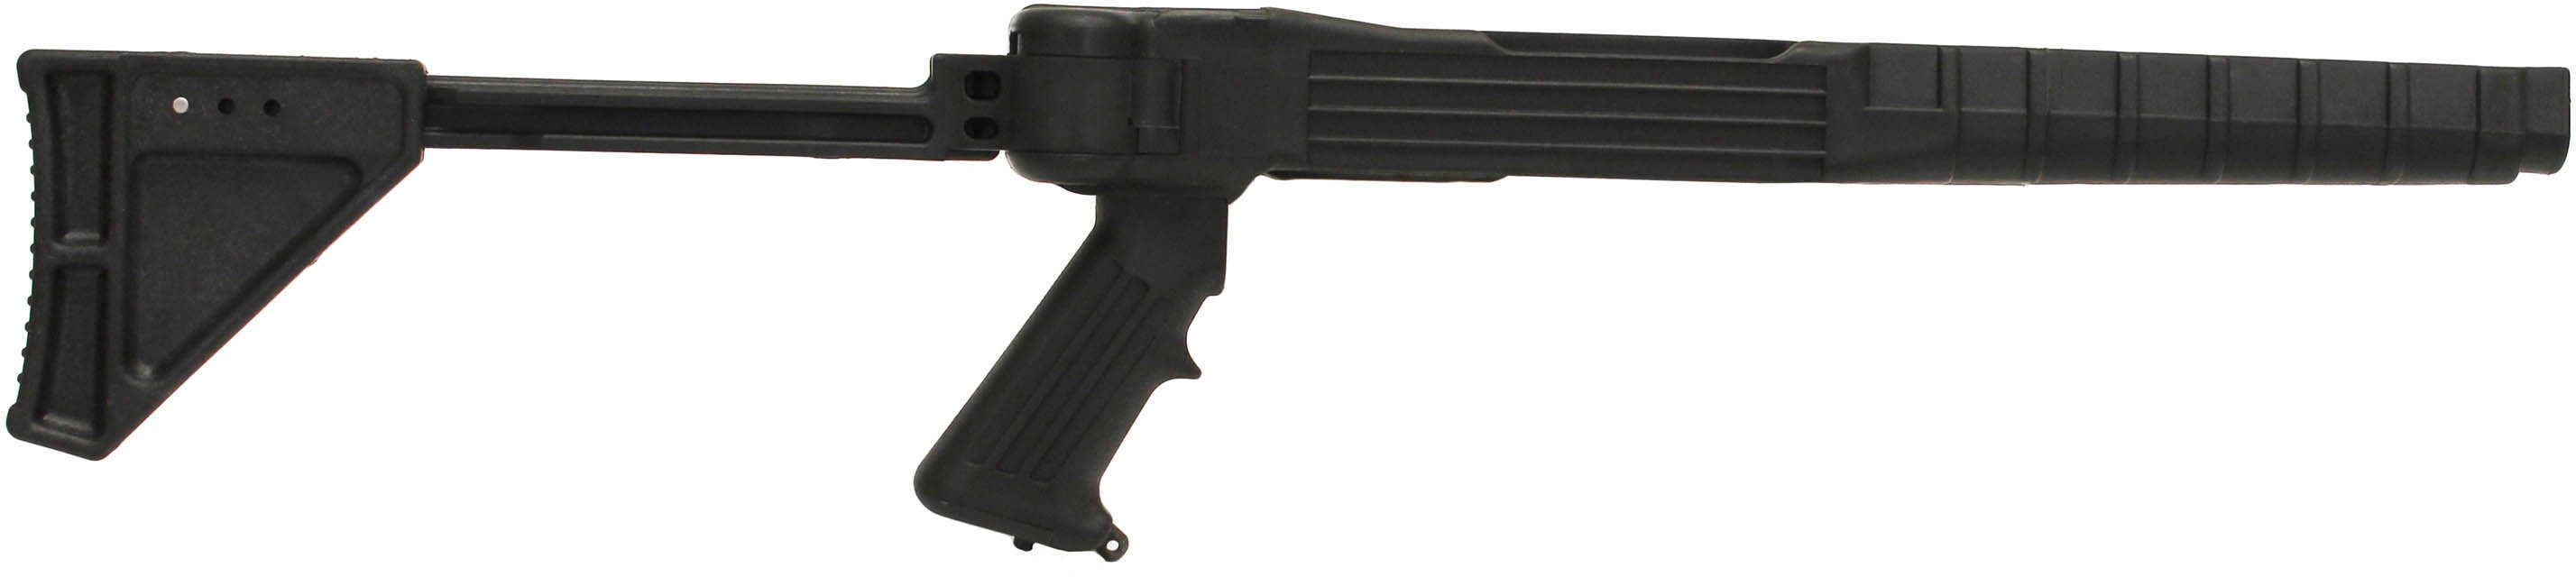 Champion Targets 78077 Lock-Arm Non-Folding Ruger® 10-22 Stock Polymer Black